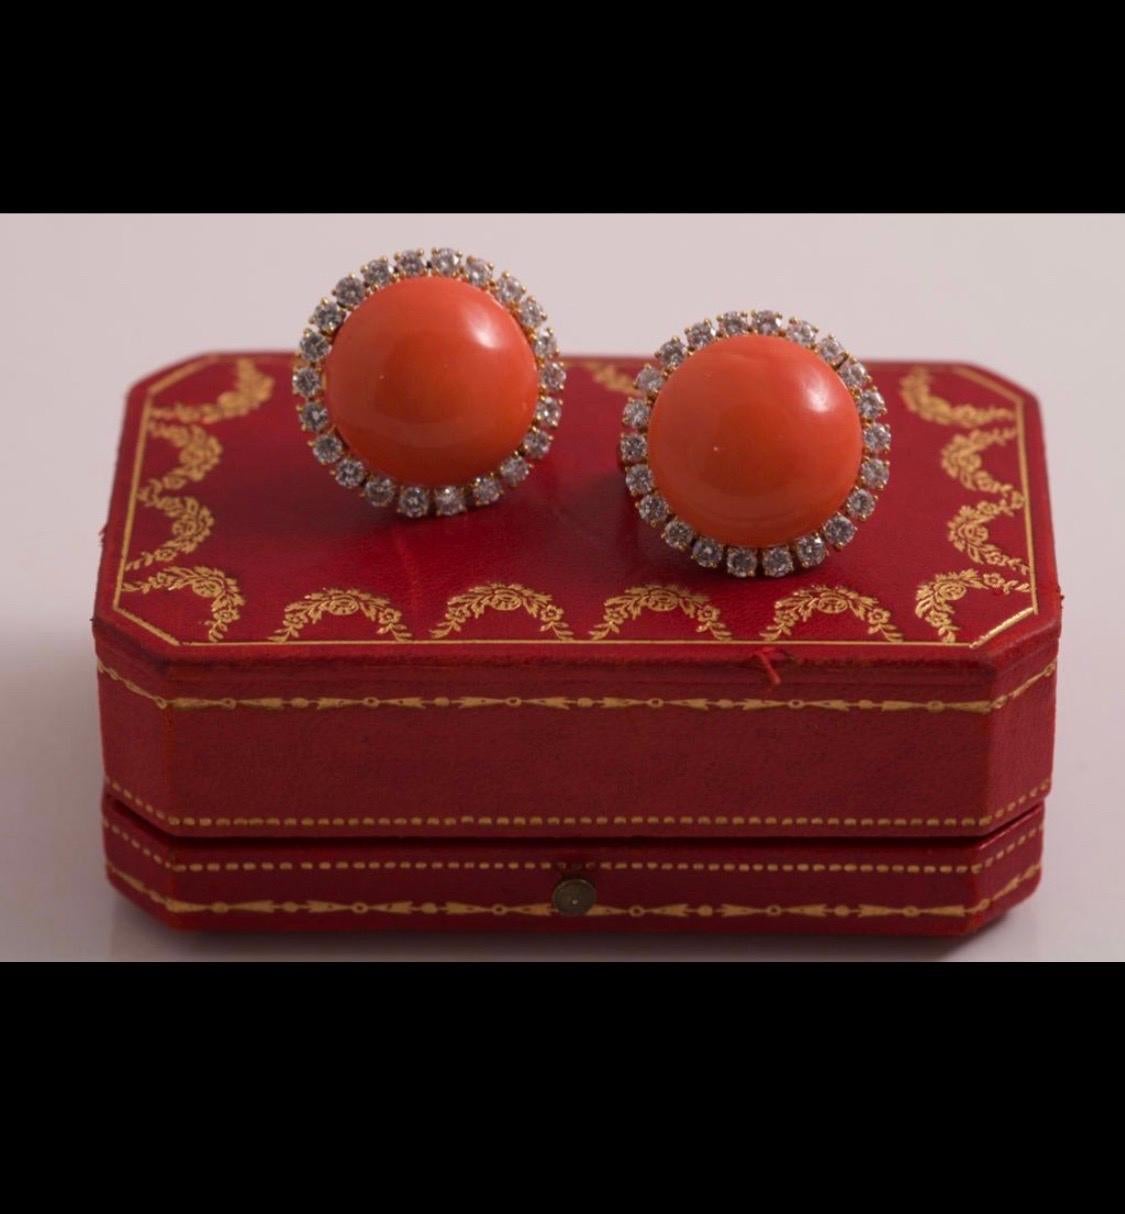 Magnificent Pair of Cartier Corallium rubrum Precious Coral and Diamond Circular Clip Earrings in Yellow Gold, 1960s, fitted in a Cartier case from the period. Each earring of a circular shape features a coral cabochon of a vibrant pinkish-Orange